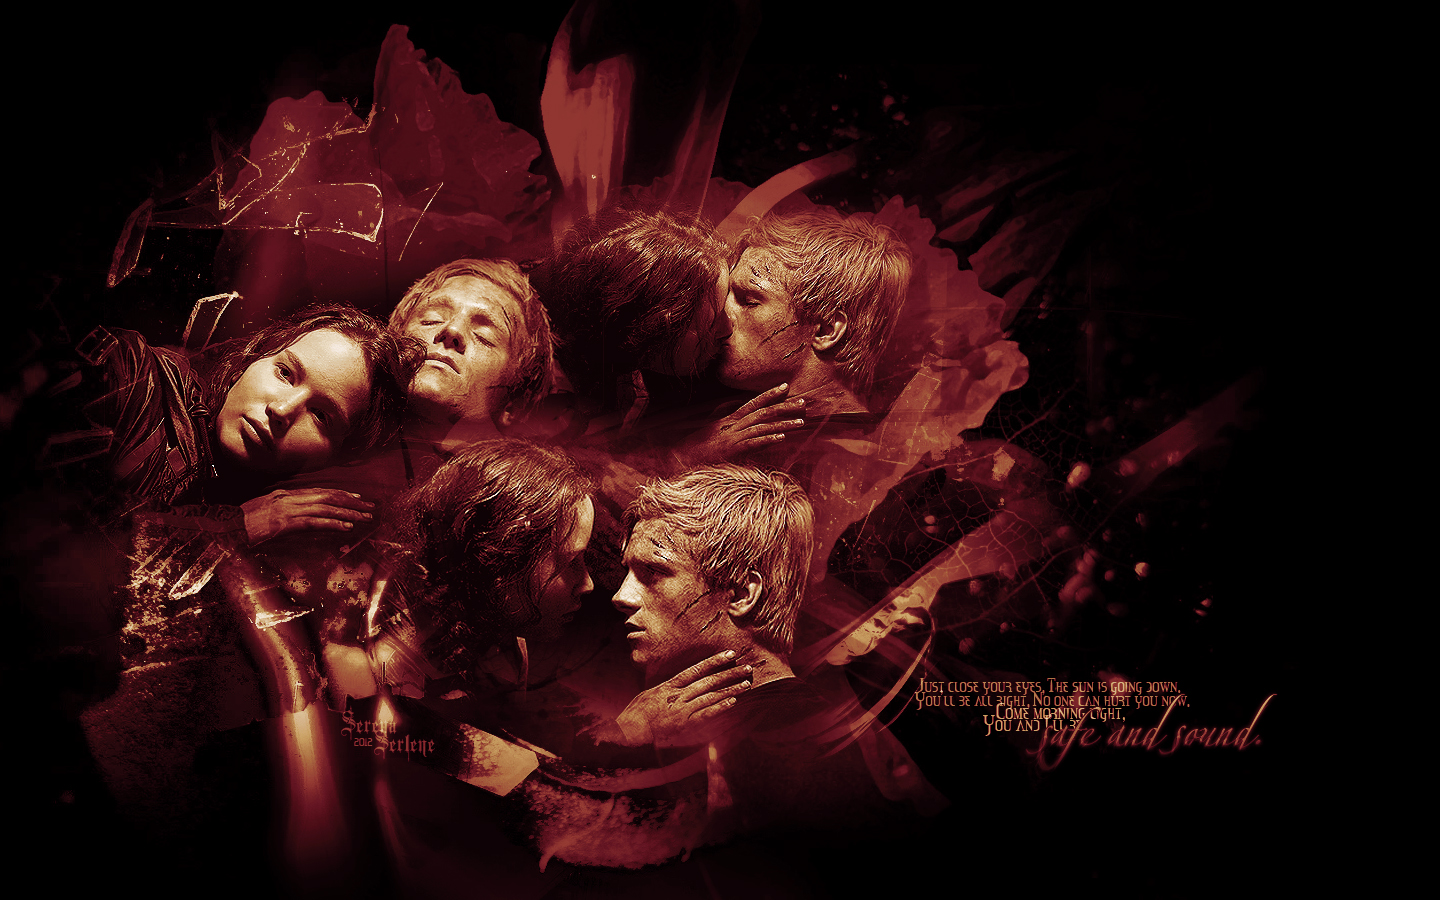 Katniss, The Hunger Games, And Hunger Games Image - Hunger Games Peeta And Katniss - HD Wallpaper 